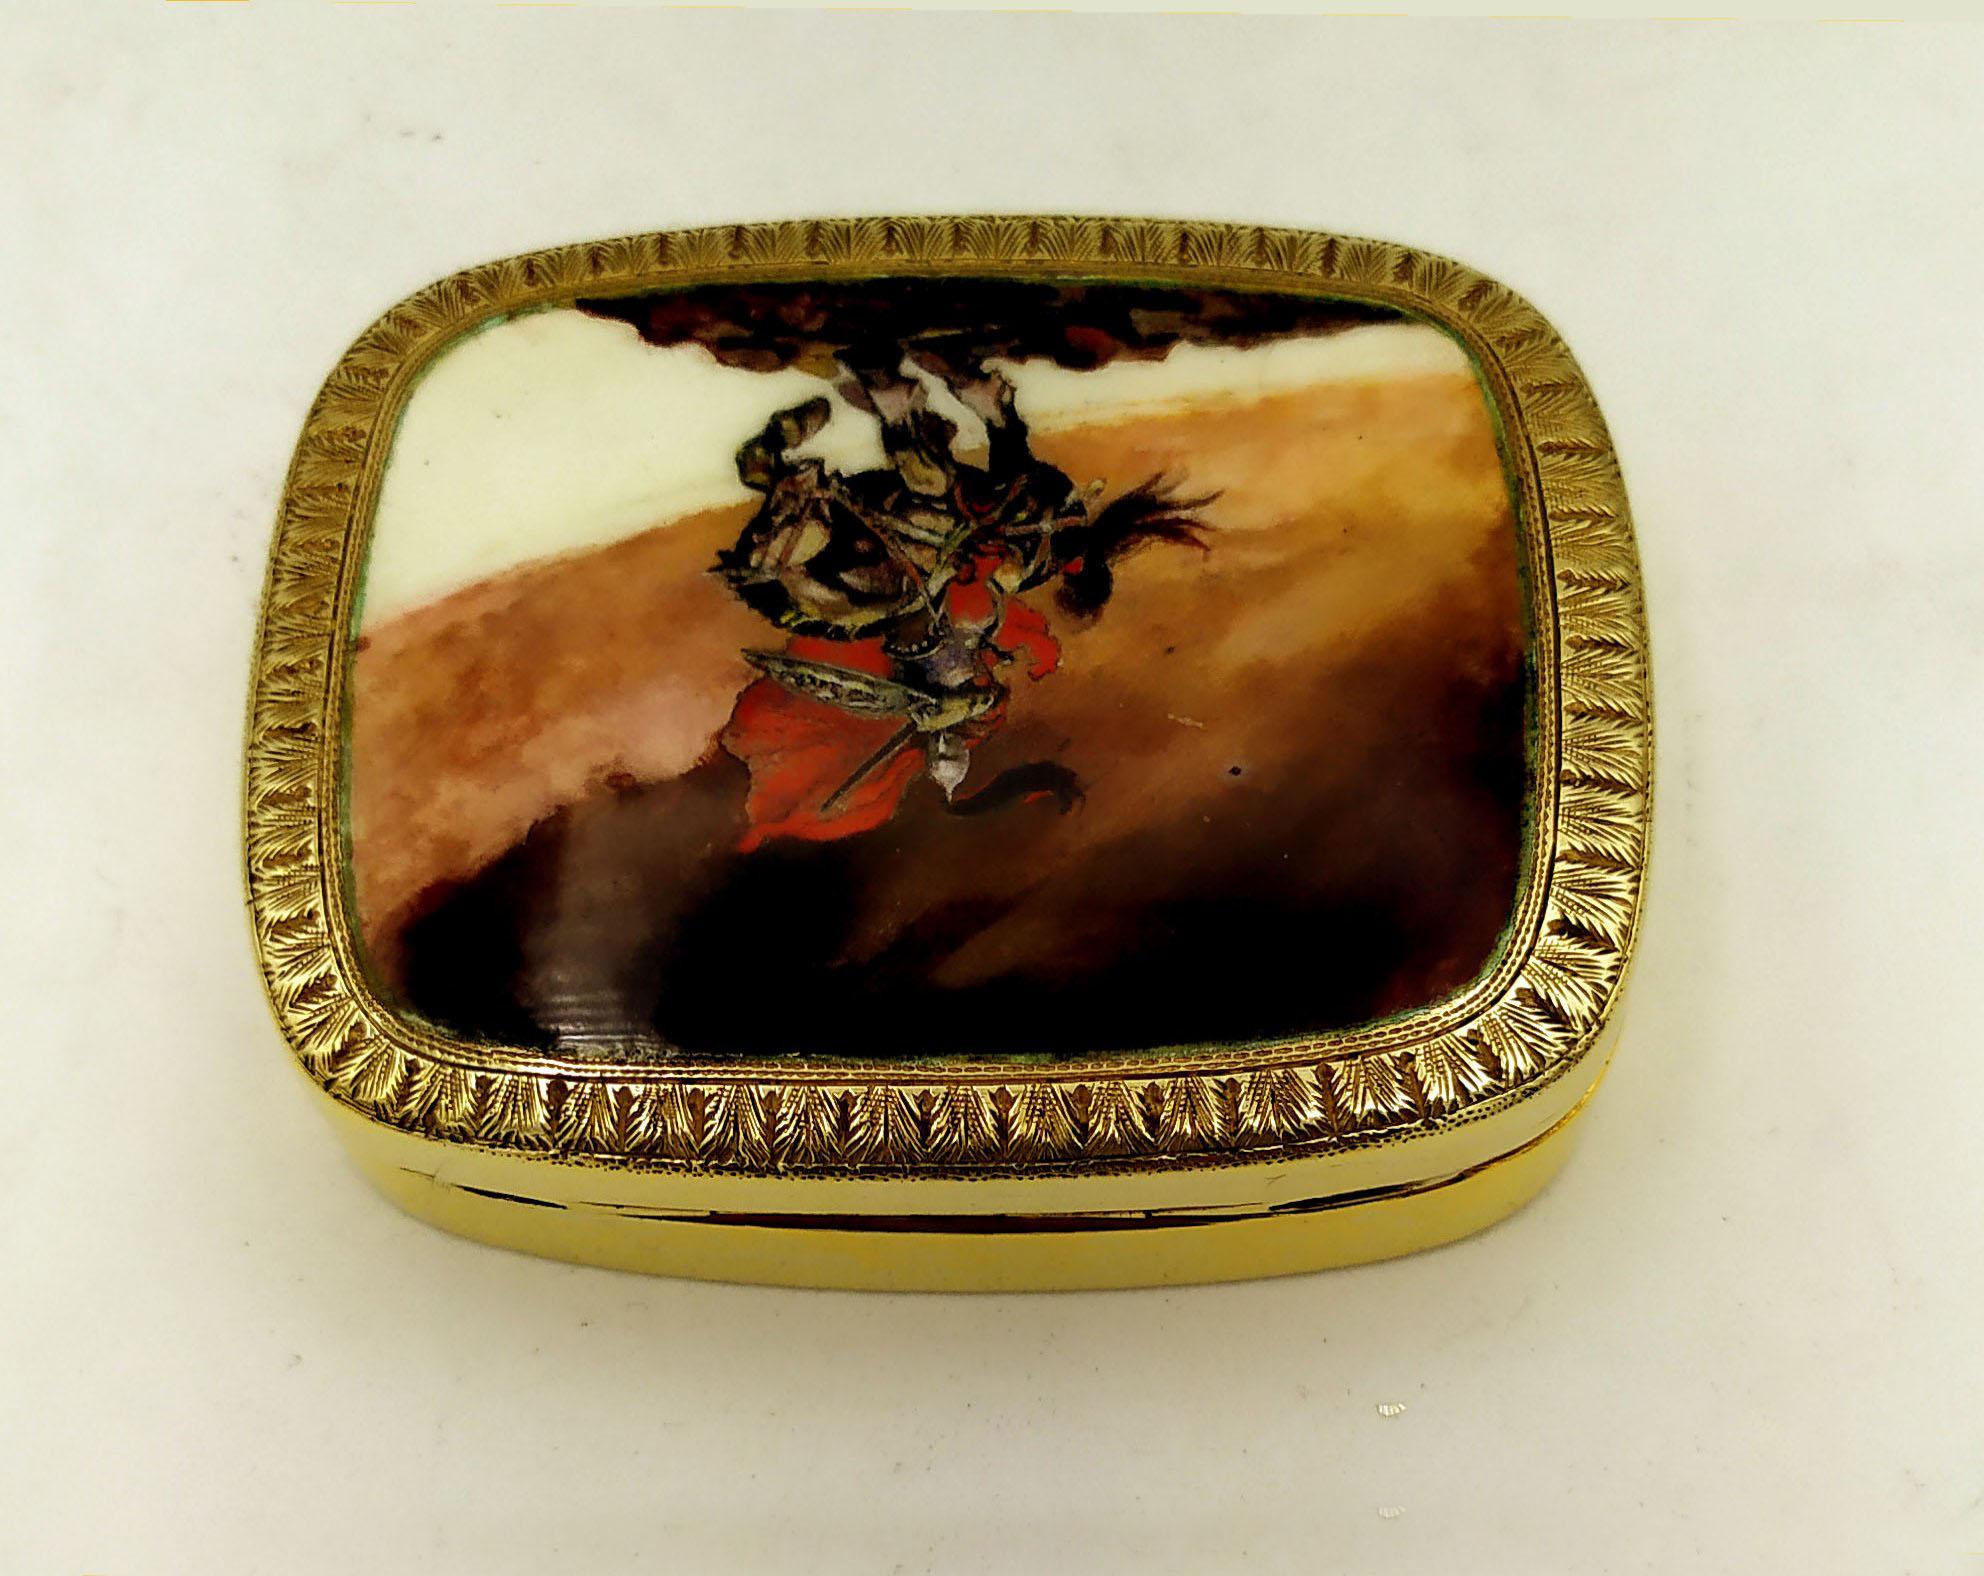 Cigarette Case Fired Enamel on a Fine Hand-Engraved Mountain Landscape Sterling  In Excellent Condition For Sale In Firenze, FI